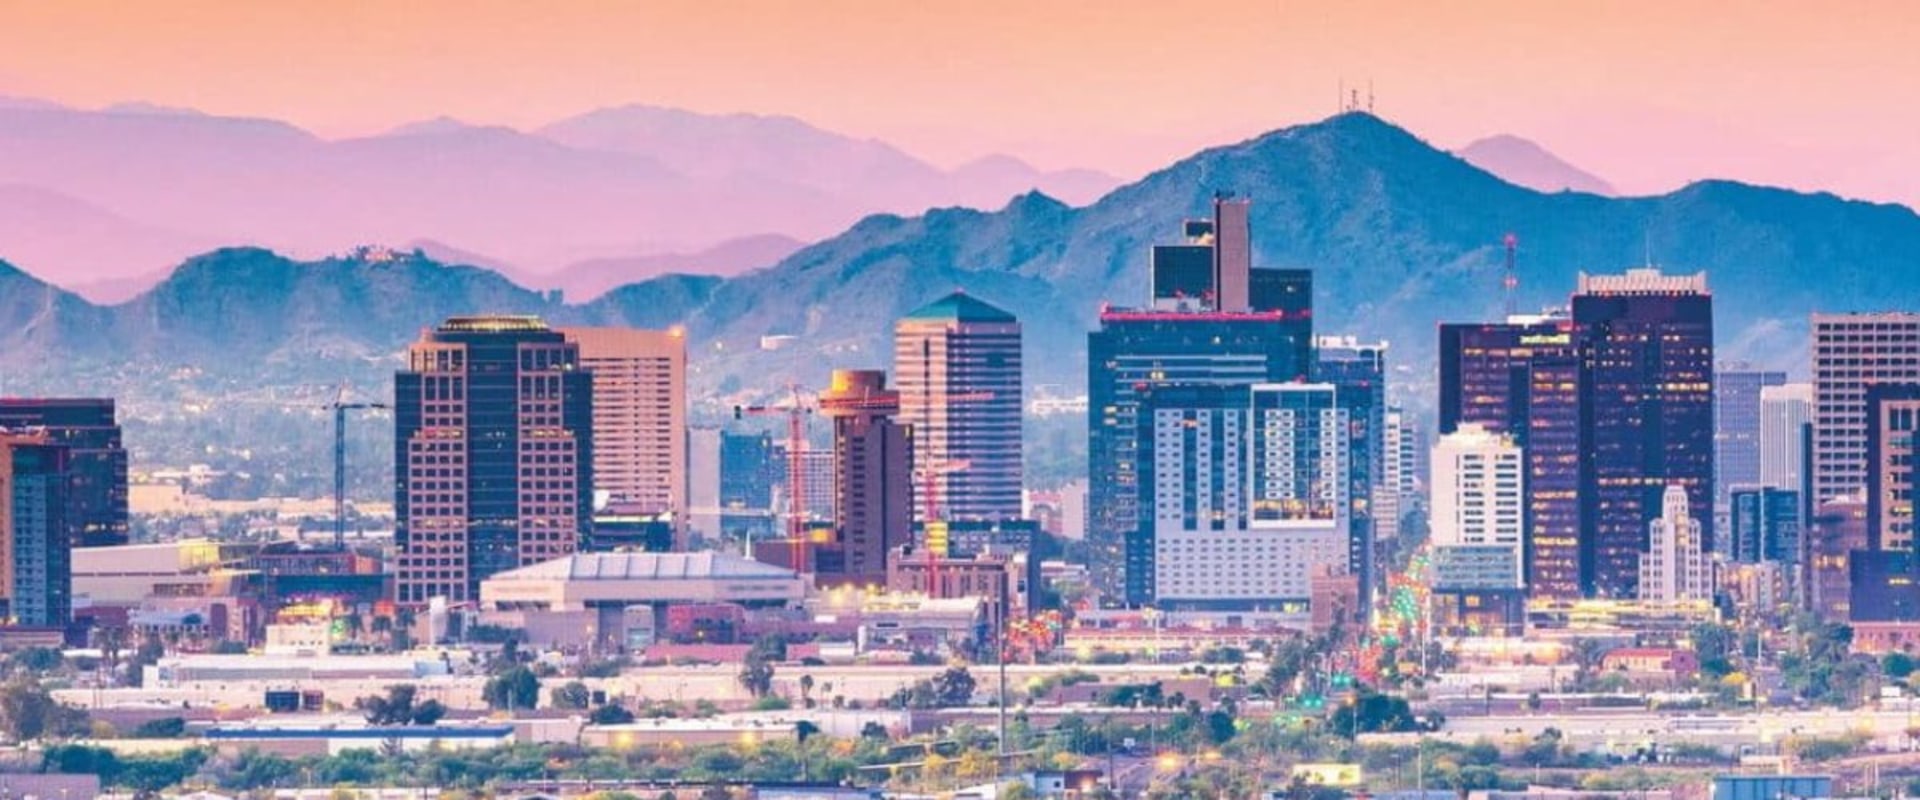 Launch Your Startup in Scottsdale, AZ: Business Incubators and Accelerators